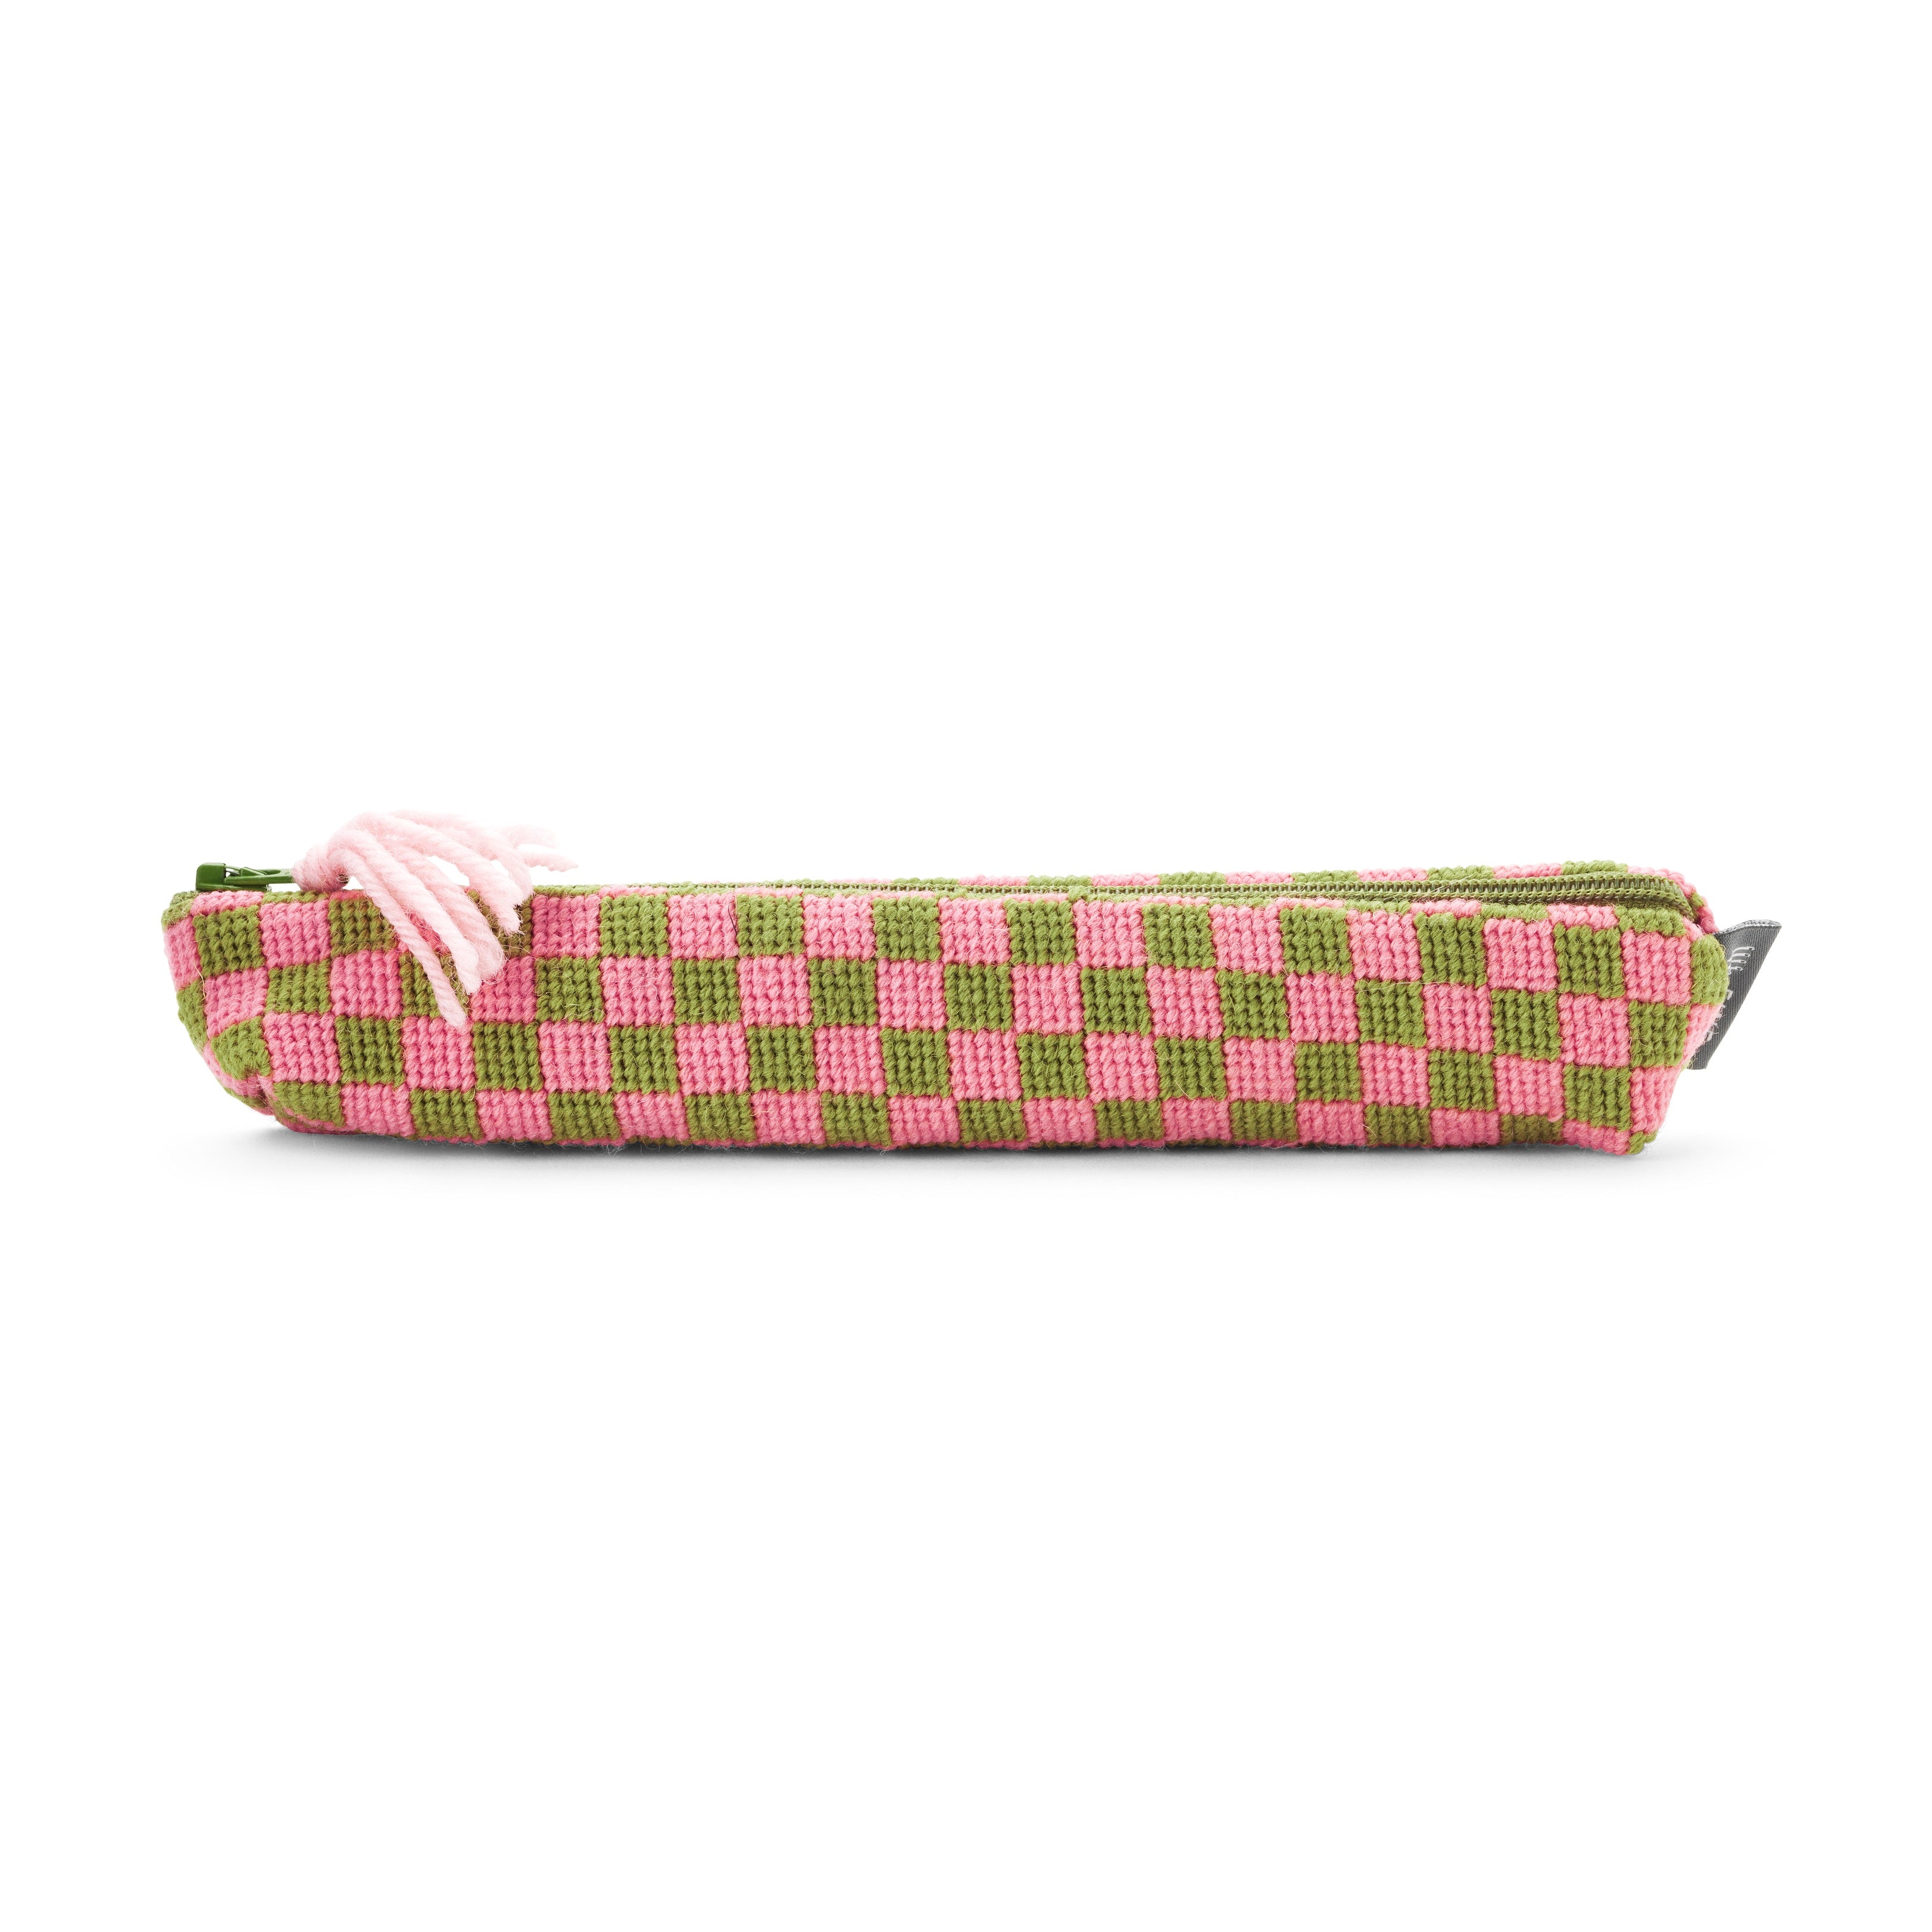 Sissinghurst Chequerboard Needlepoint Pencil Case Pink and Green Cath Kidston for Fine Cell Work